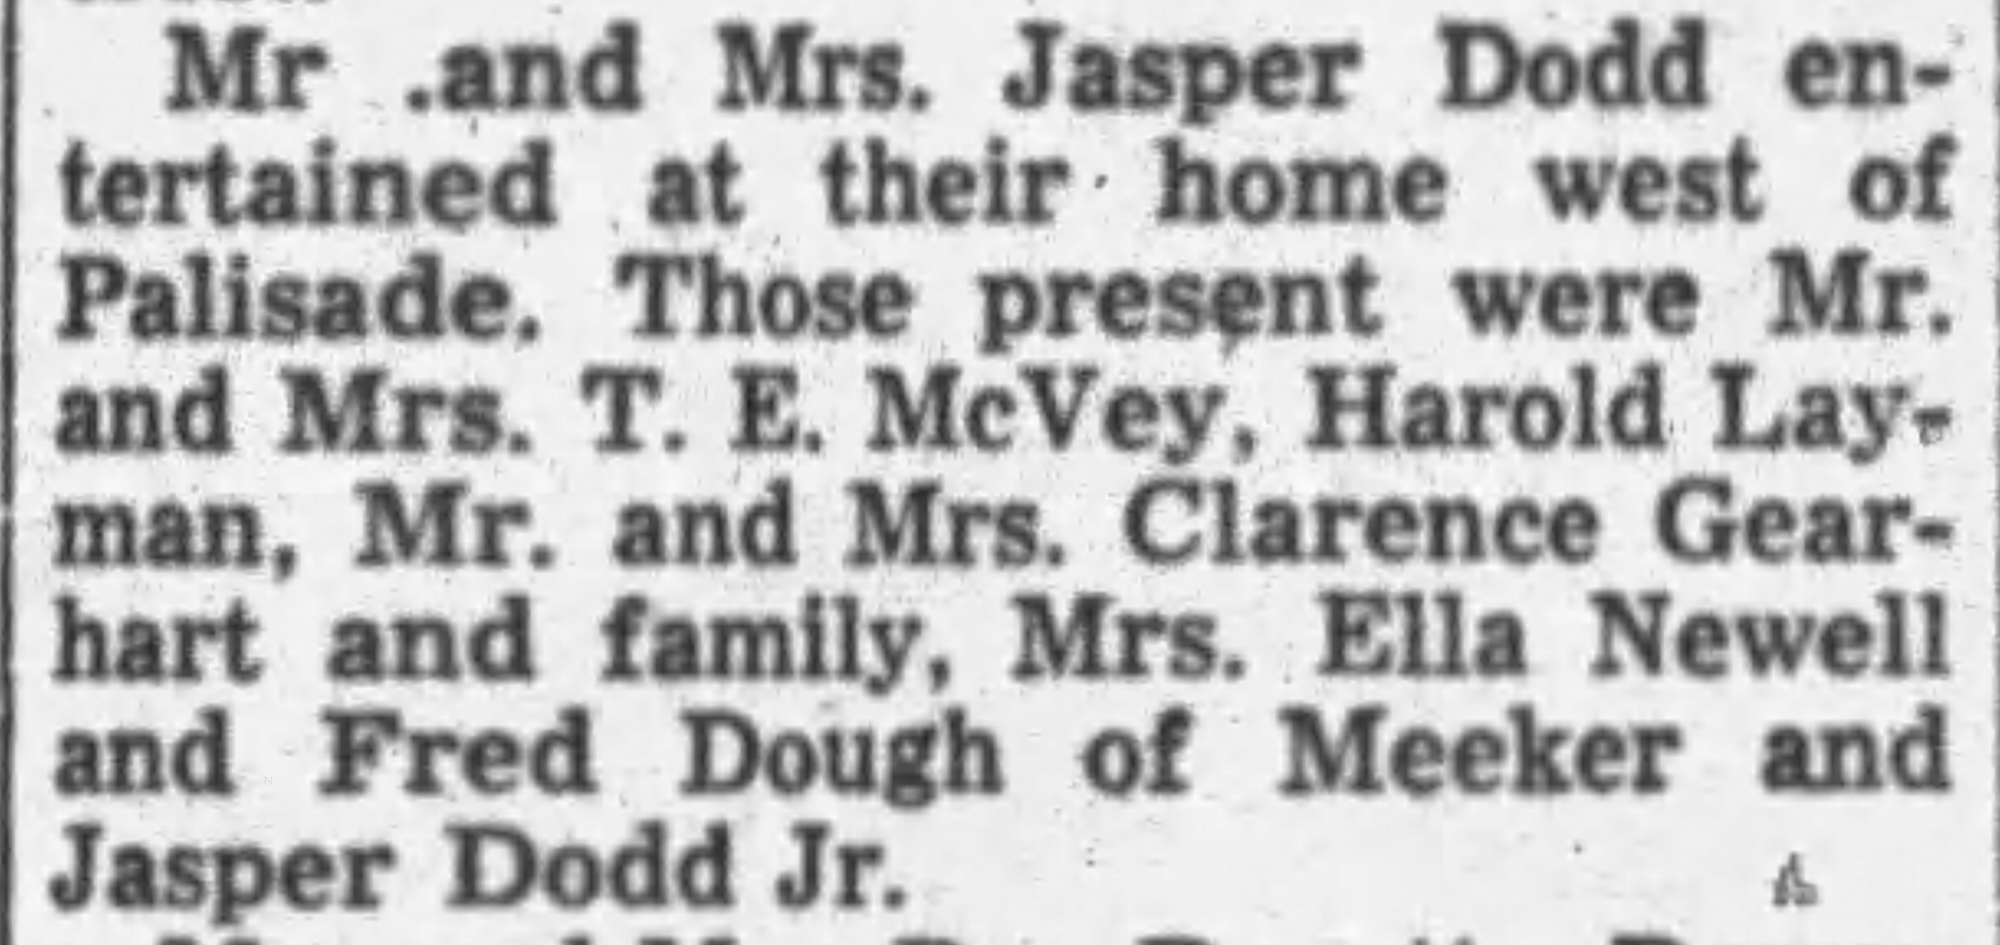 Dauth Family Archive - 1943-12-27 - The Daily Sentinel - Fred Dauth Visiting Jasper Dodd Family